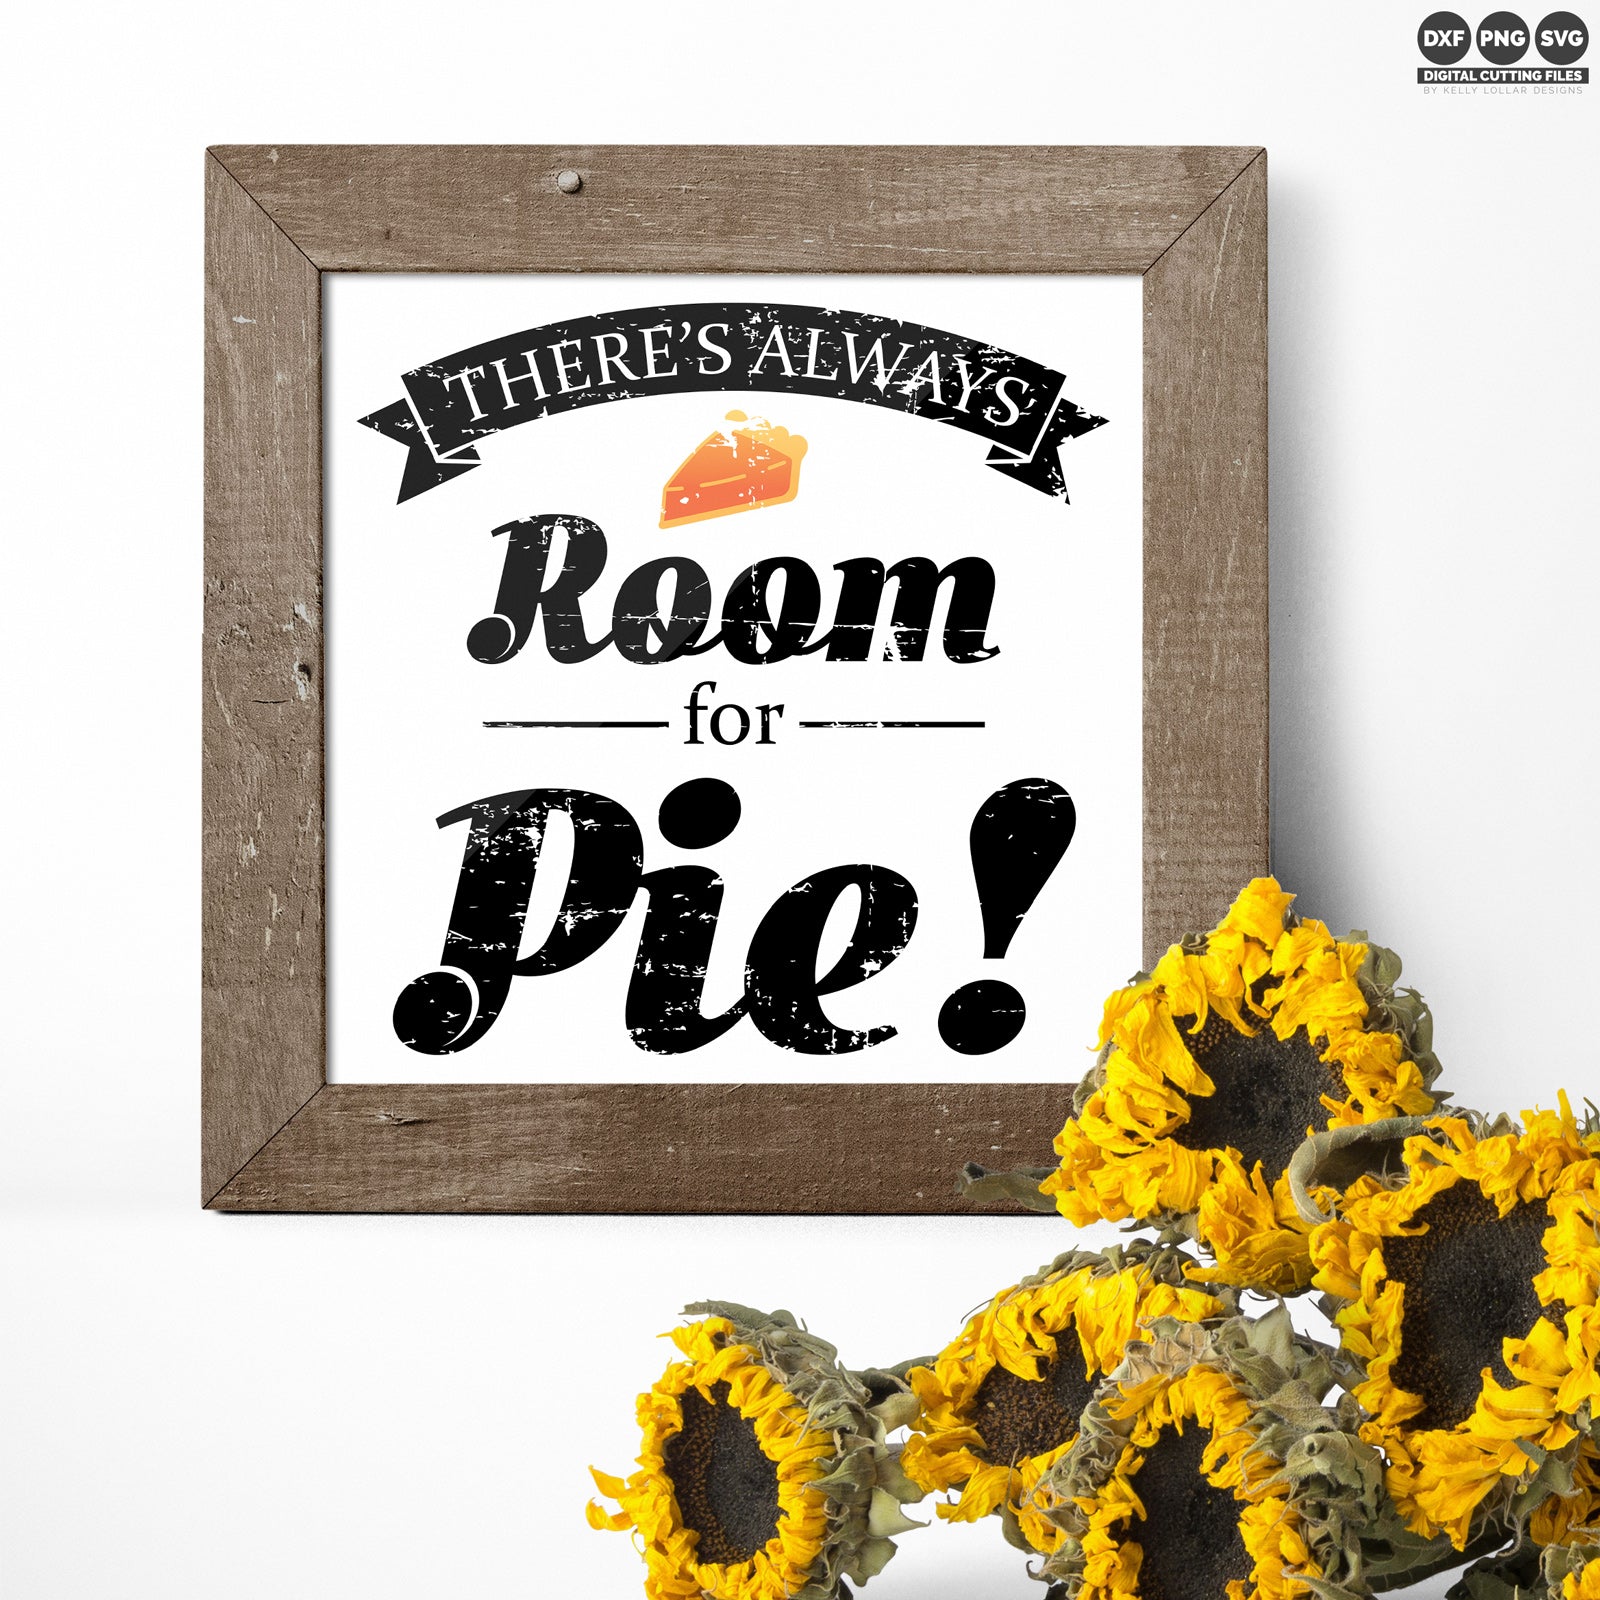 Freebie Friday SVG - There's Always Room for Pie Thanksgiving quote with a retro diner feel - includes solid and distressed versions